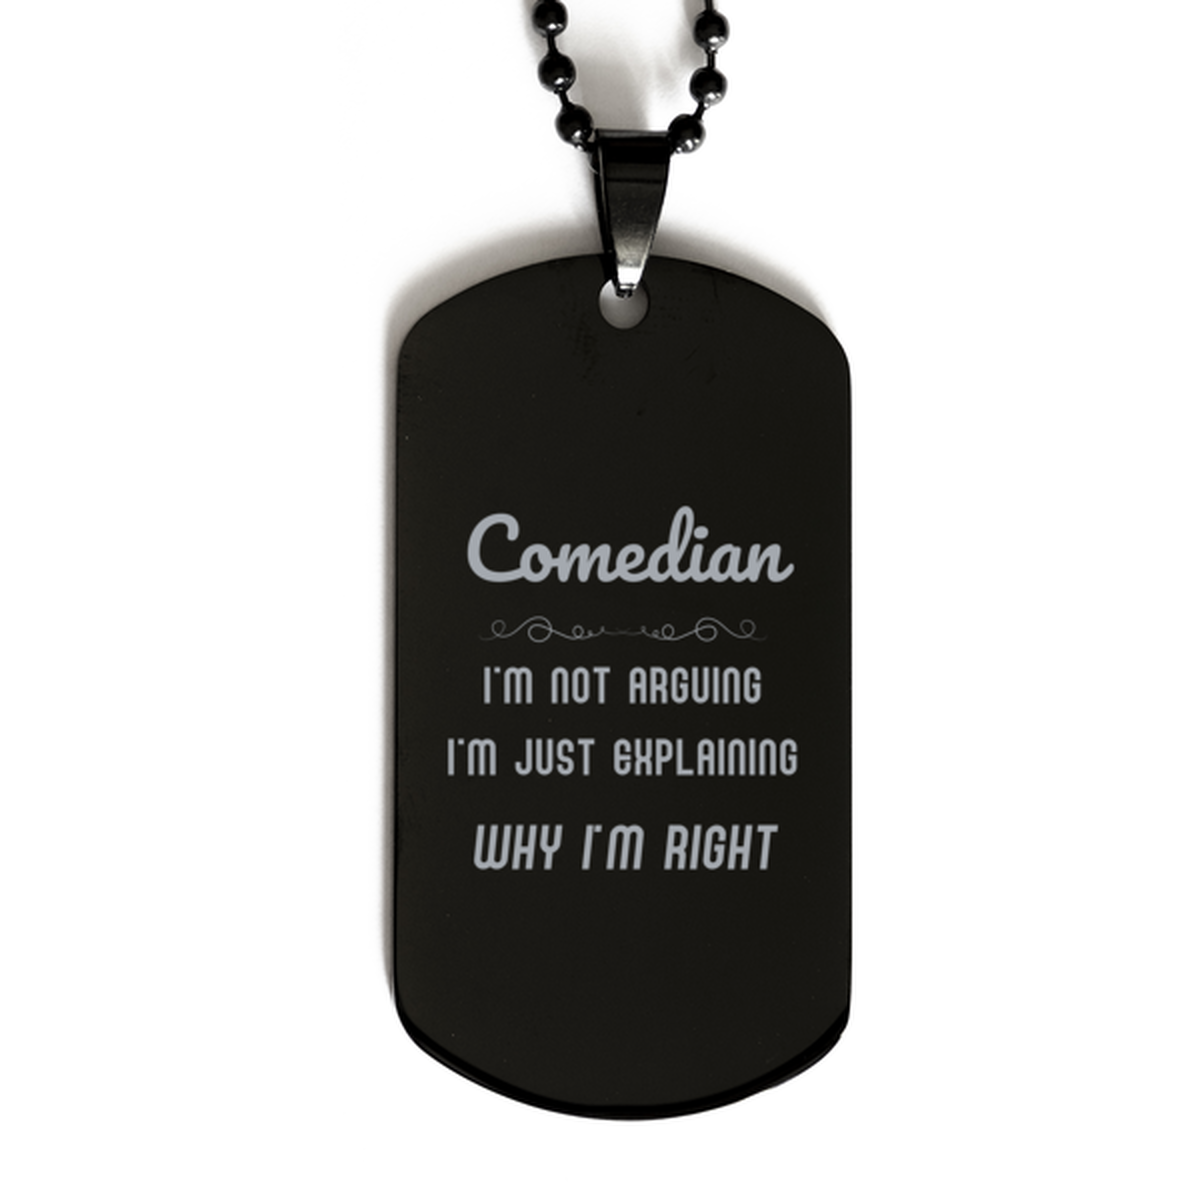 Comedian I'm not Arguing. I'm Just Explaining Why I'm RIGHT Black Dog Tag, Funny Saying Quote Comedian Gifts For Comedian Graduation Birthday Christmas Gifts for Men Women Coworker